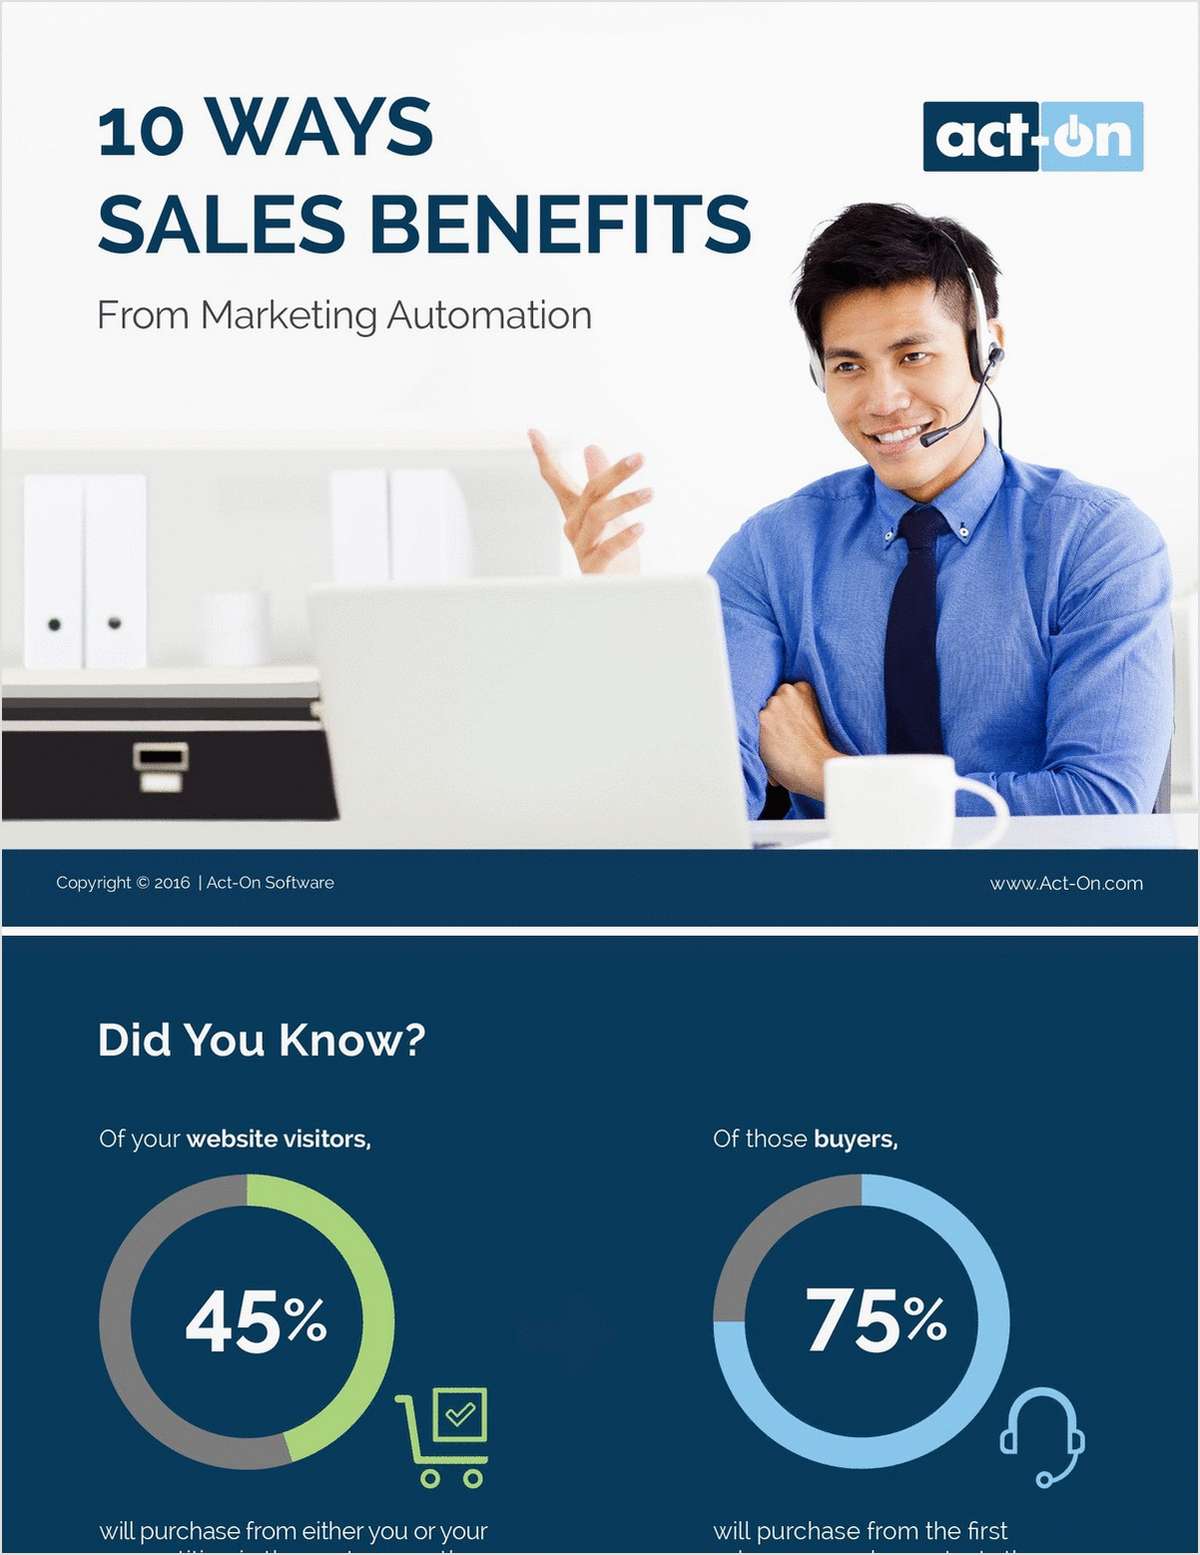 10 Ways Sales Benefits from Marketing Automation